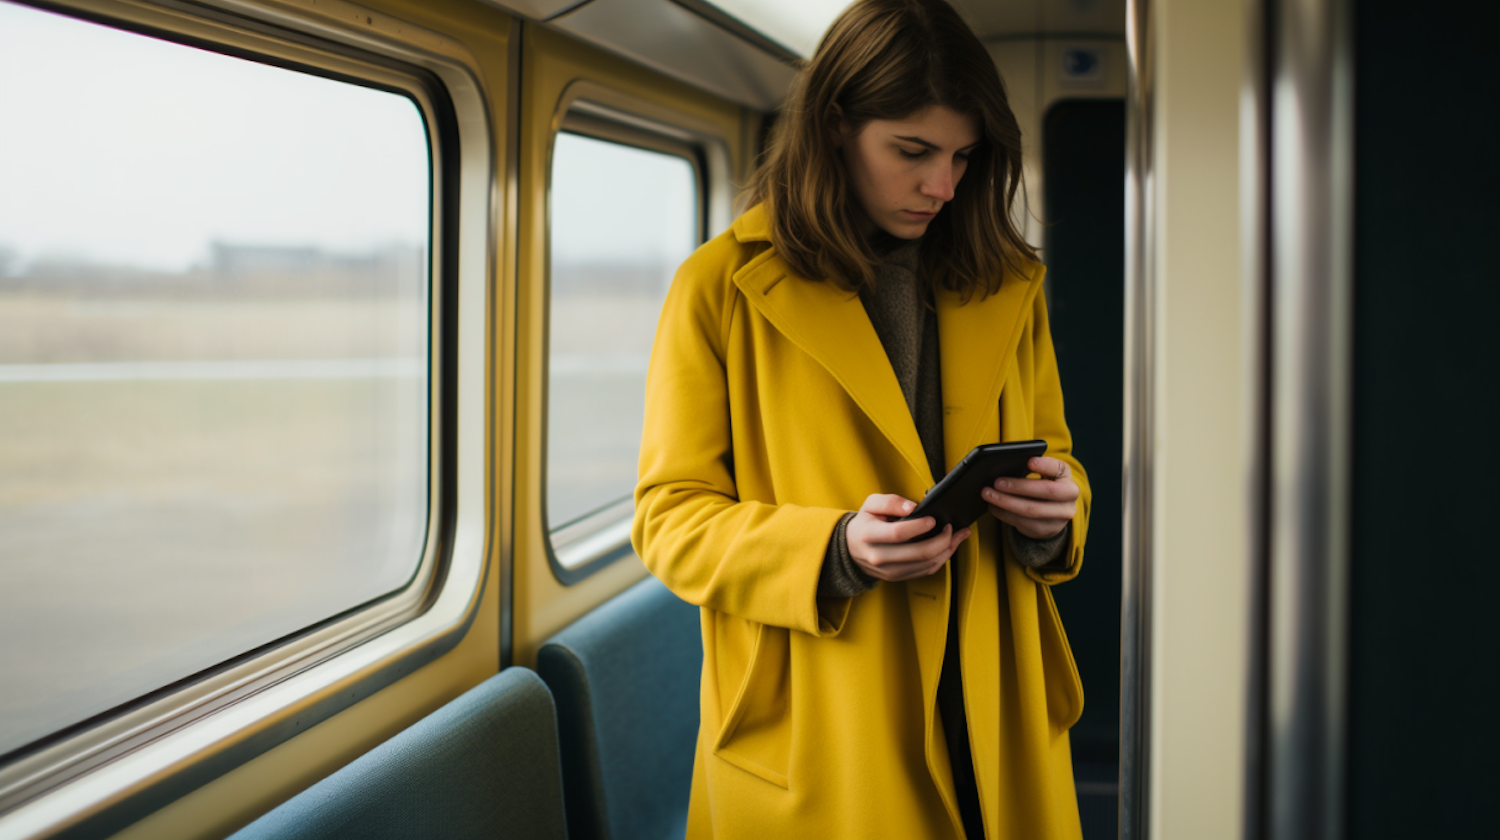 Commuter in Yellow Engrossed in Smartphone on Train